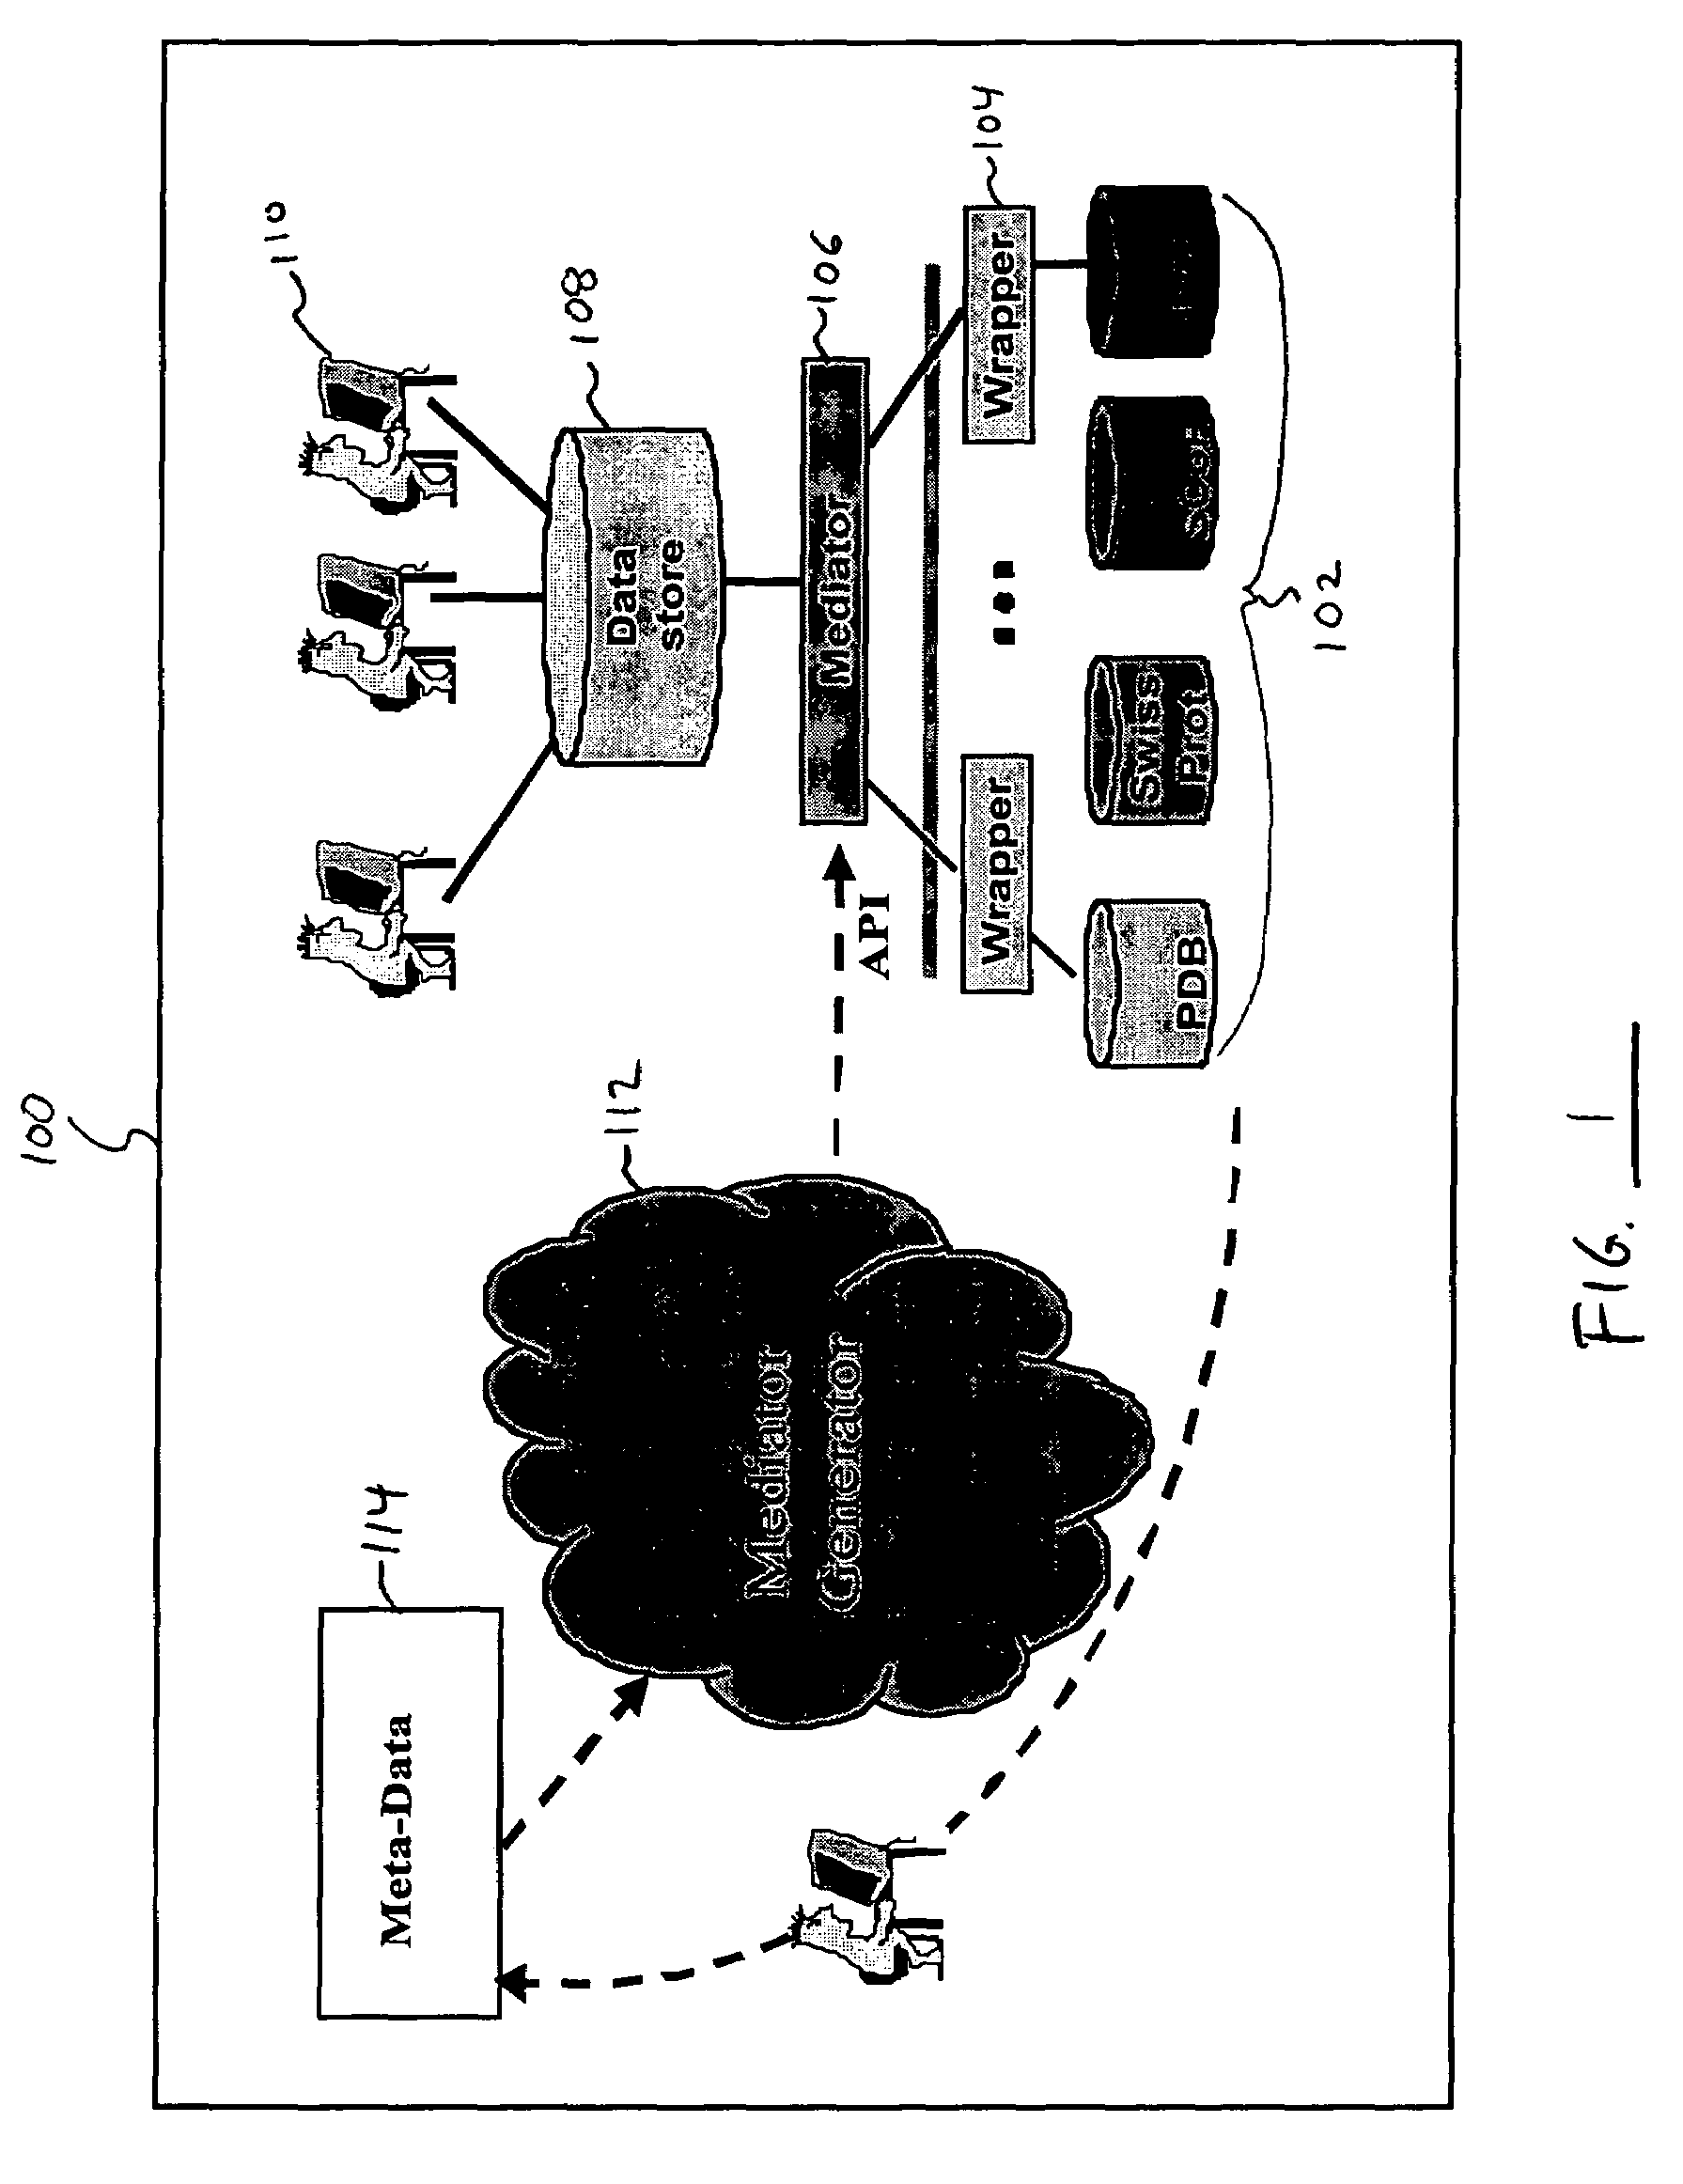 System and method for integrating and accessing multiple data sources within a data warehouse architecture